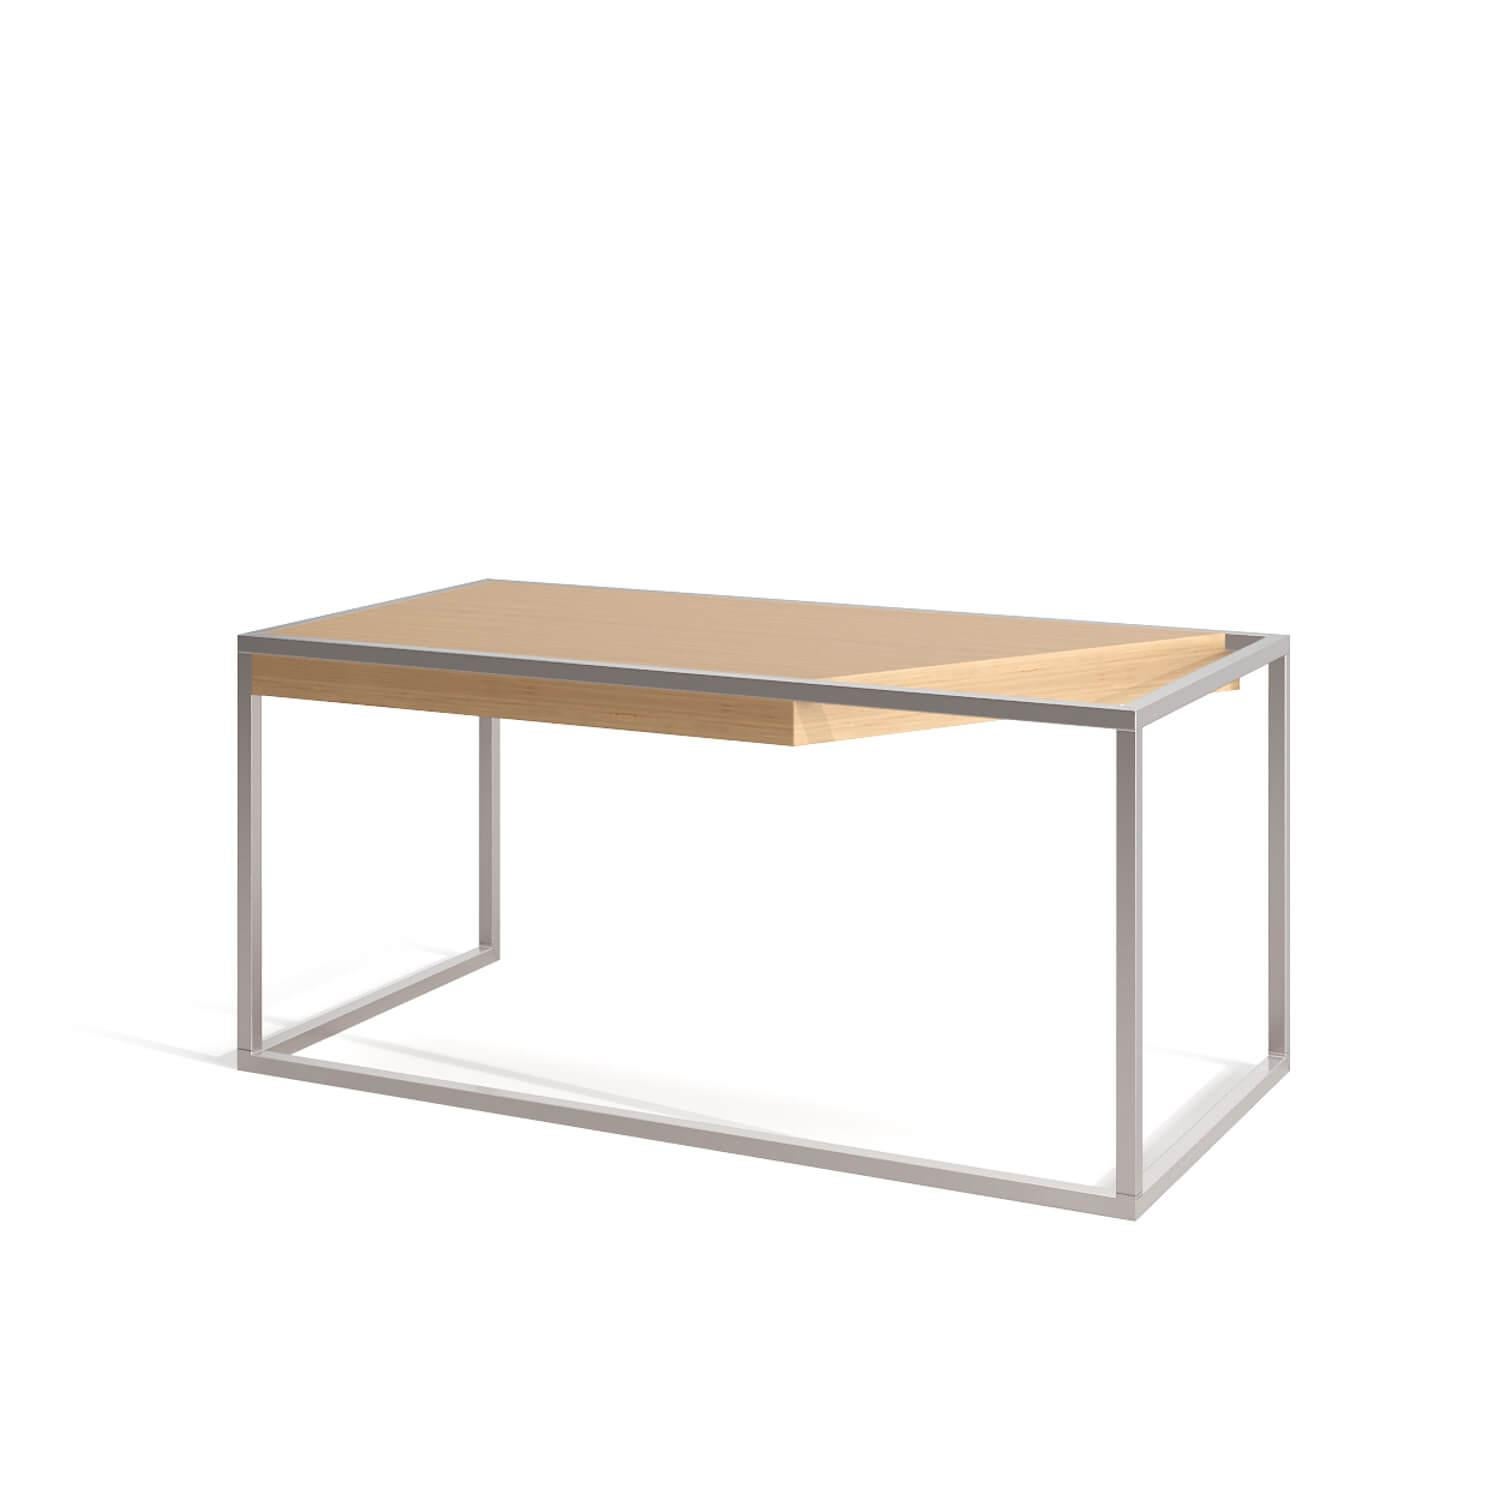 Portuguese Modern Minimalist Home Office Writing Desk Oak Wood and Brushed Stainless Steel For Sale